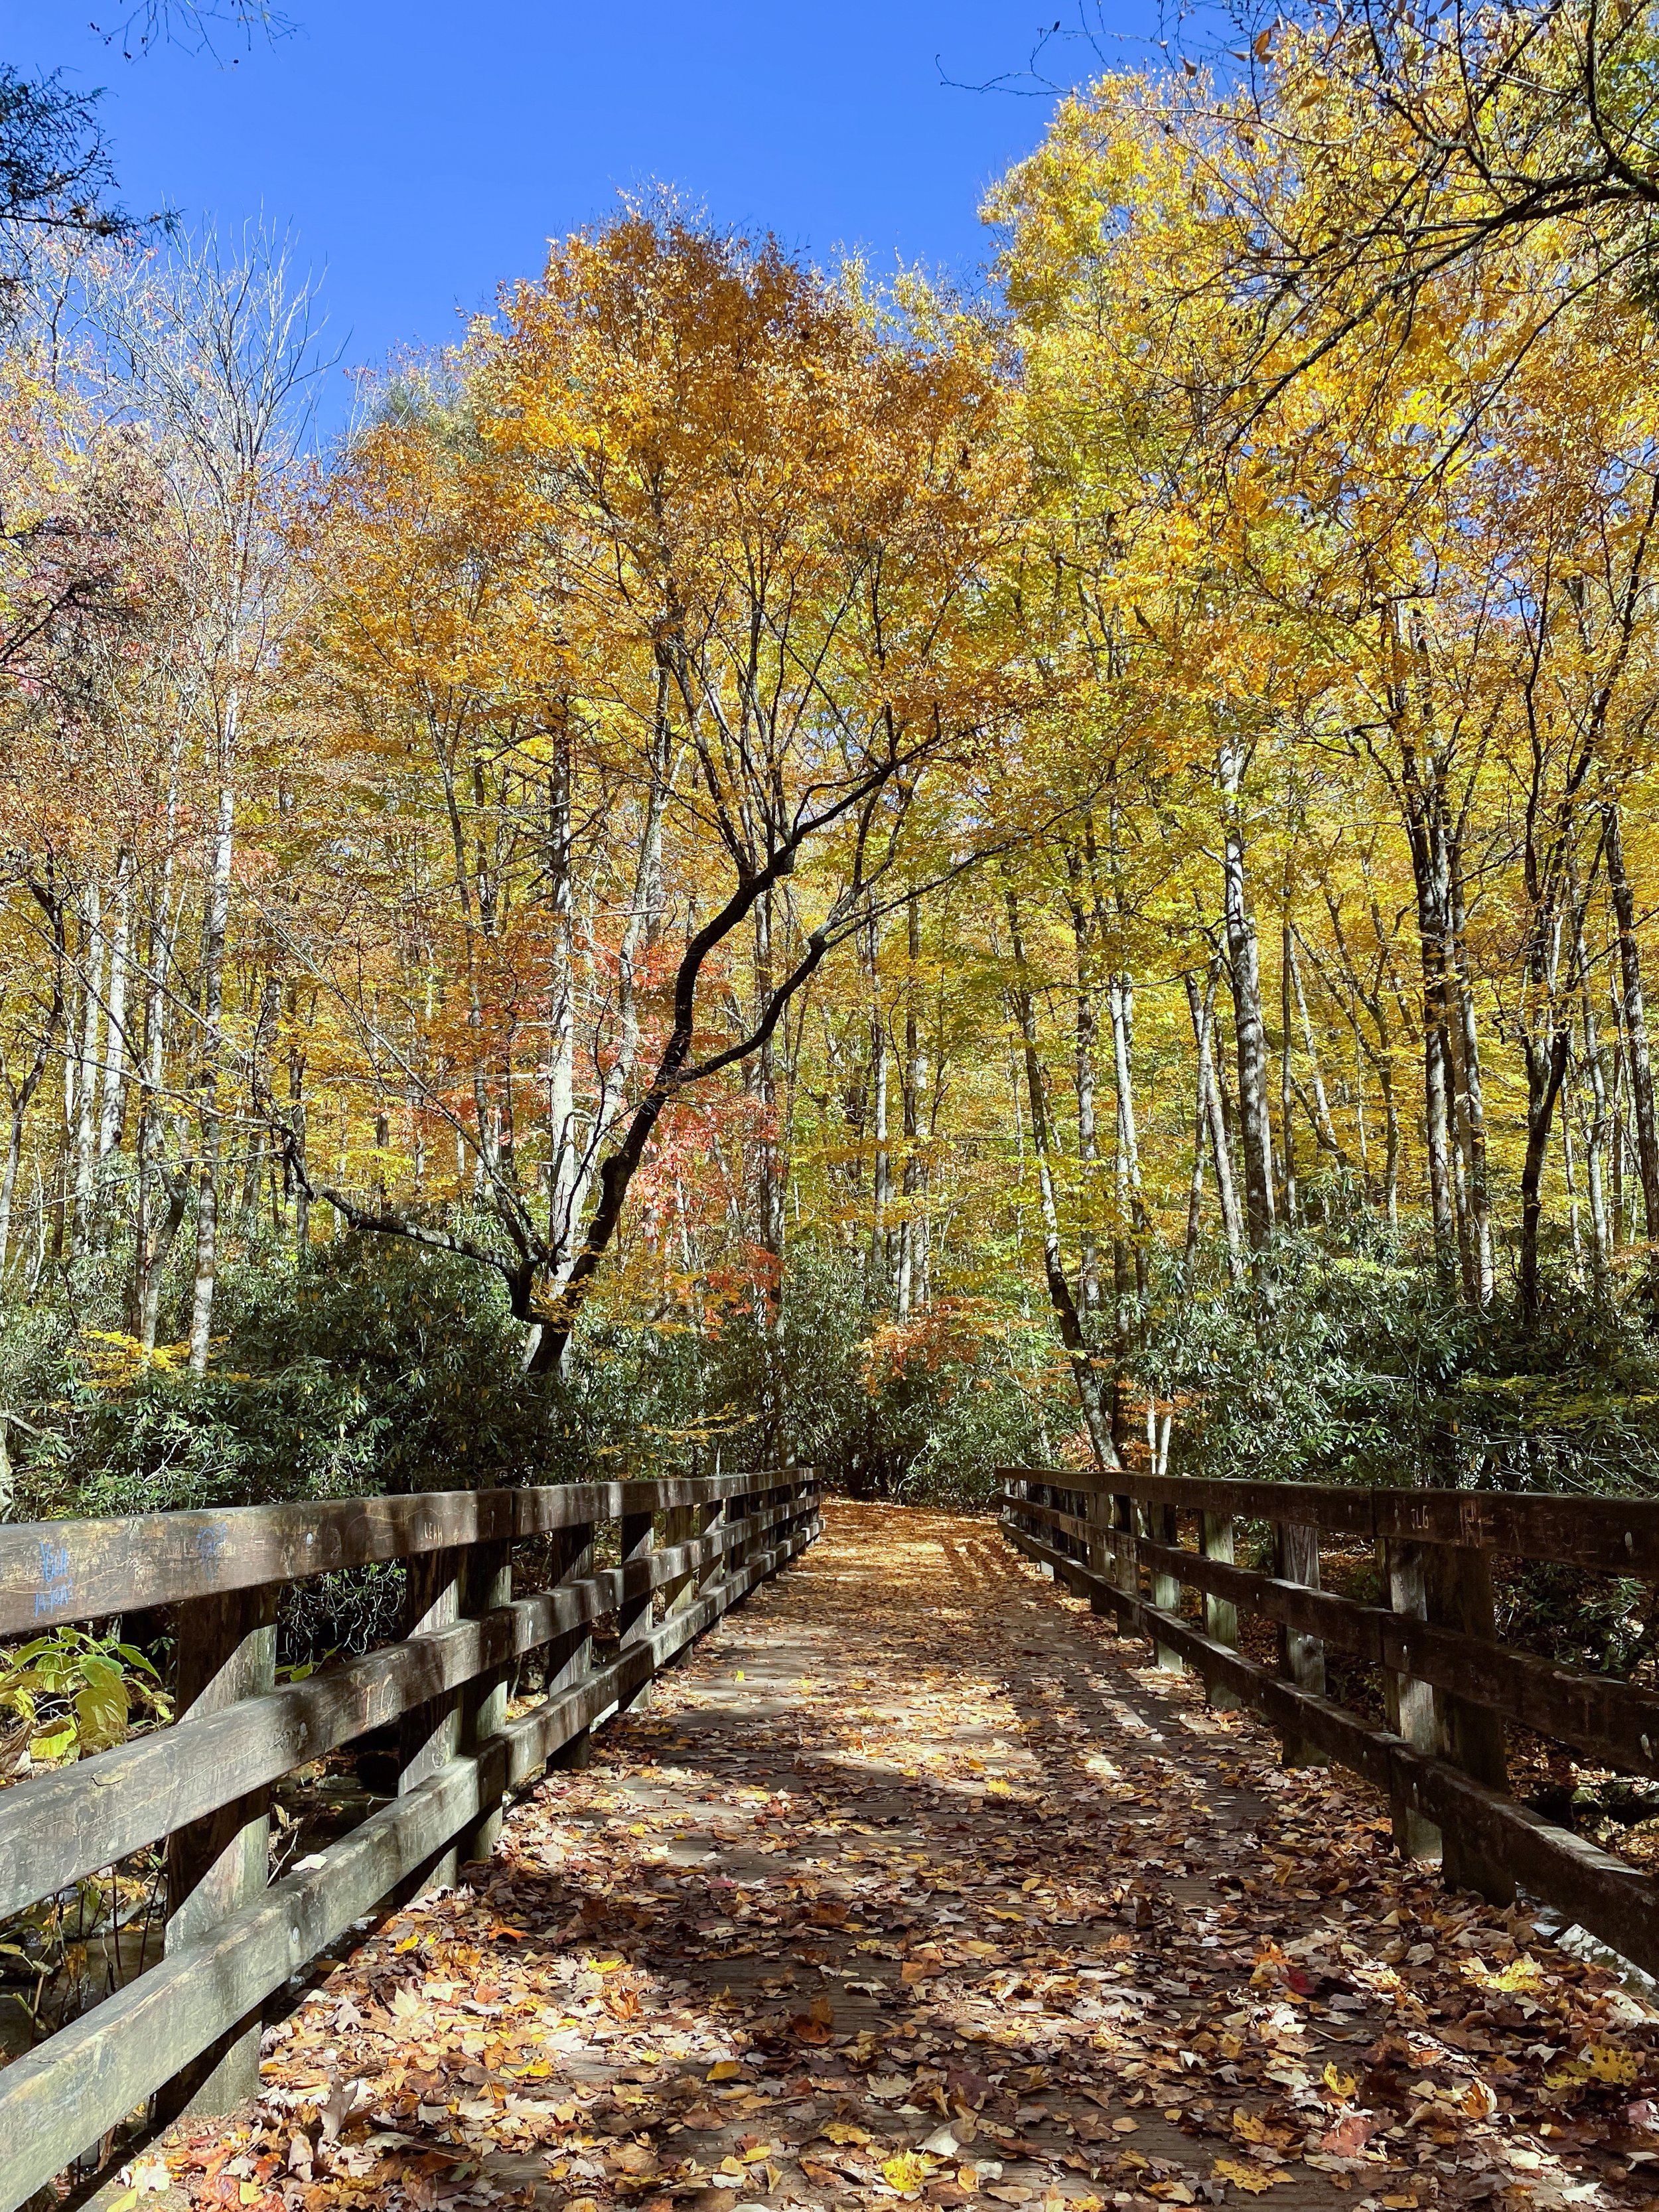  A view from the wooden bridge at the start of the Chimney Tops Trail shows the peak of the forest’s fall celebration. Image credit: Jeffrey Rose, edits by Rachel Lense for The Science Writer 